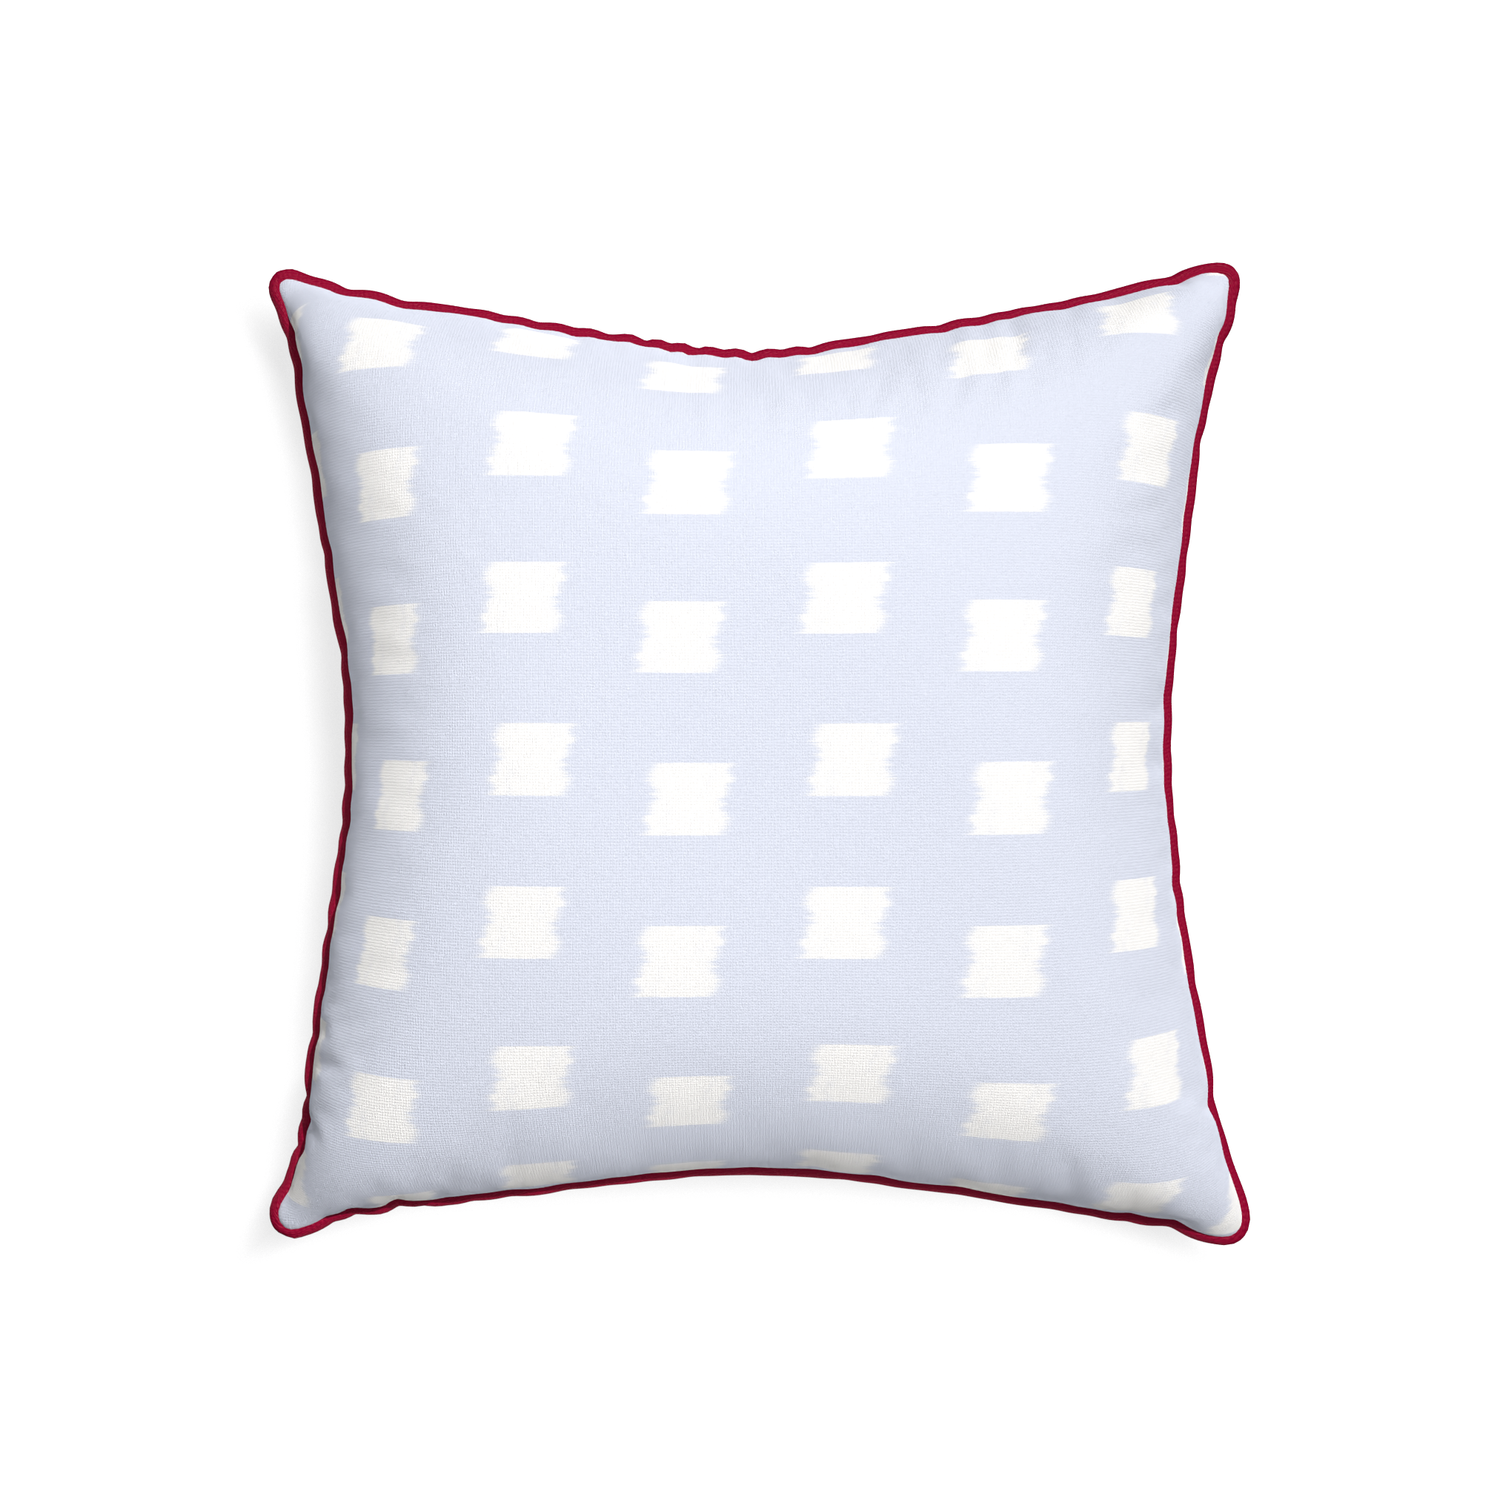 22-square denton custom sky blue patternpillow with raspberry piping on white background